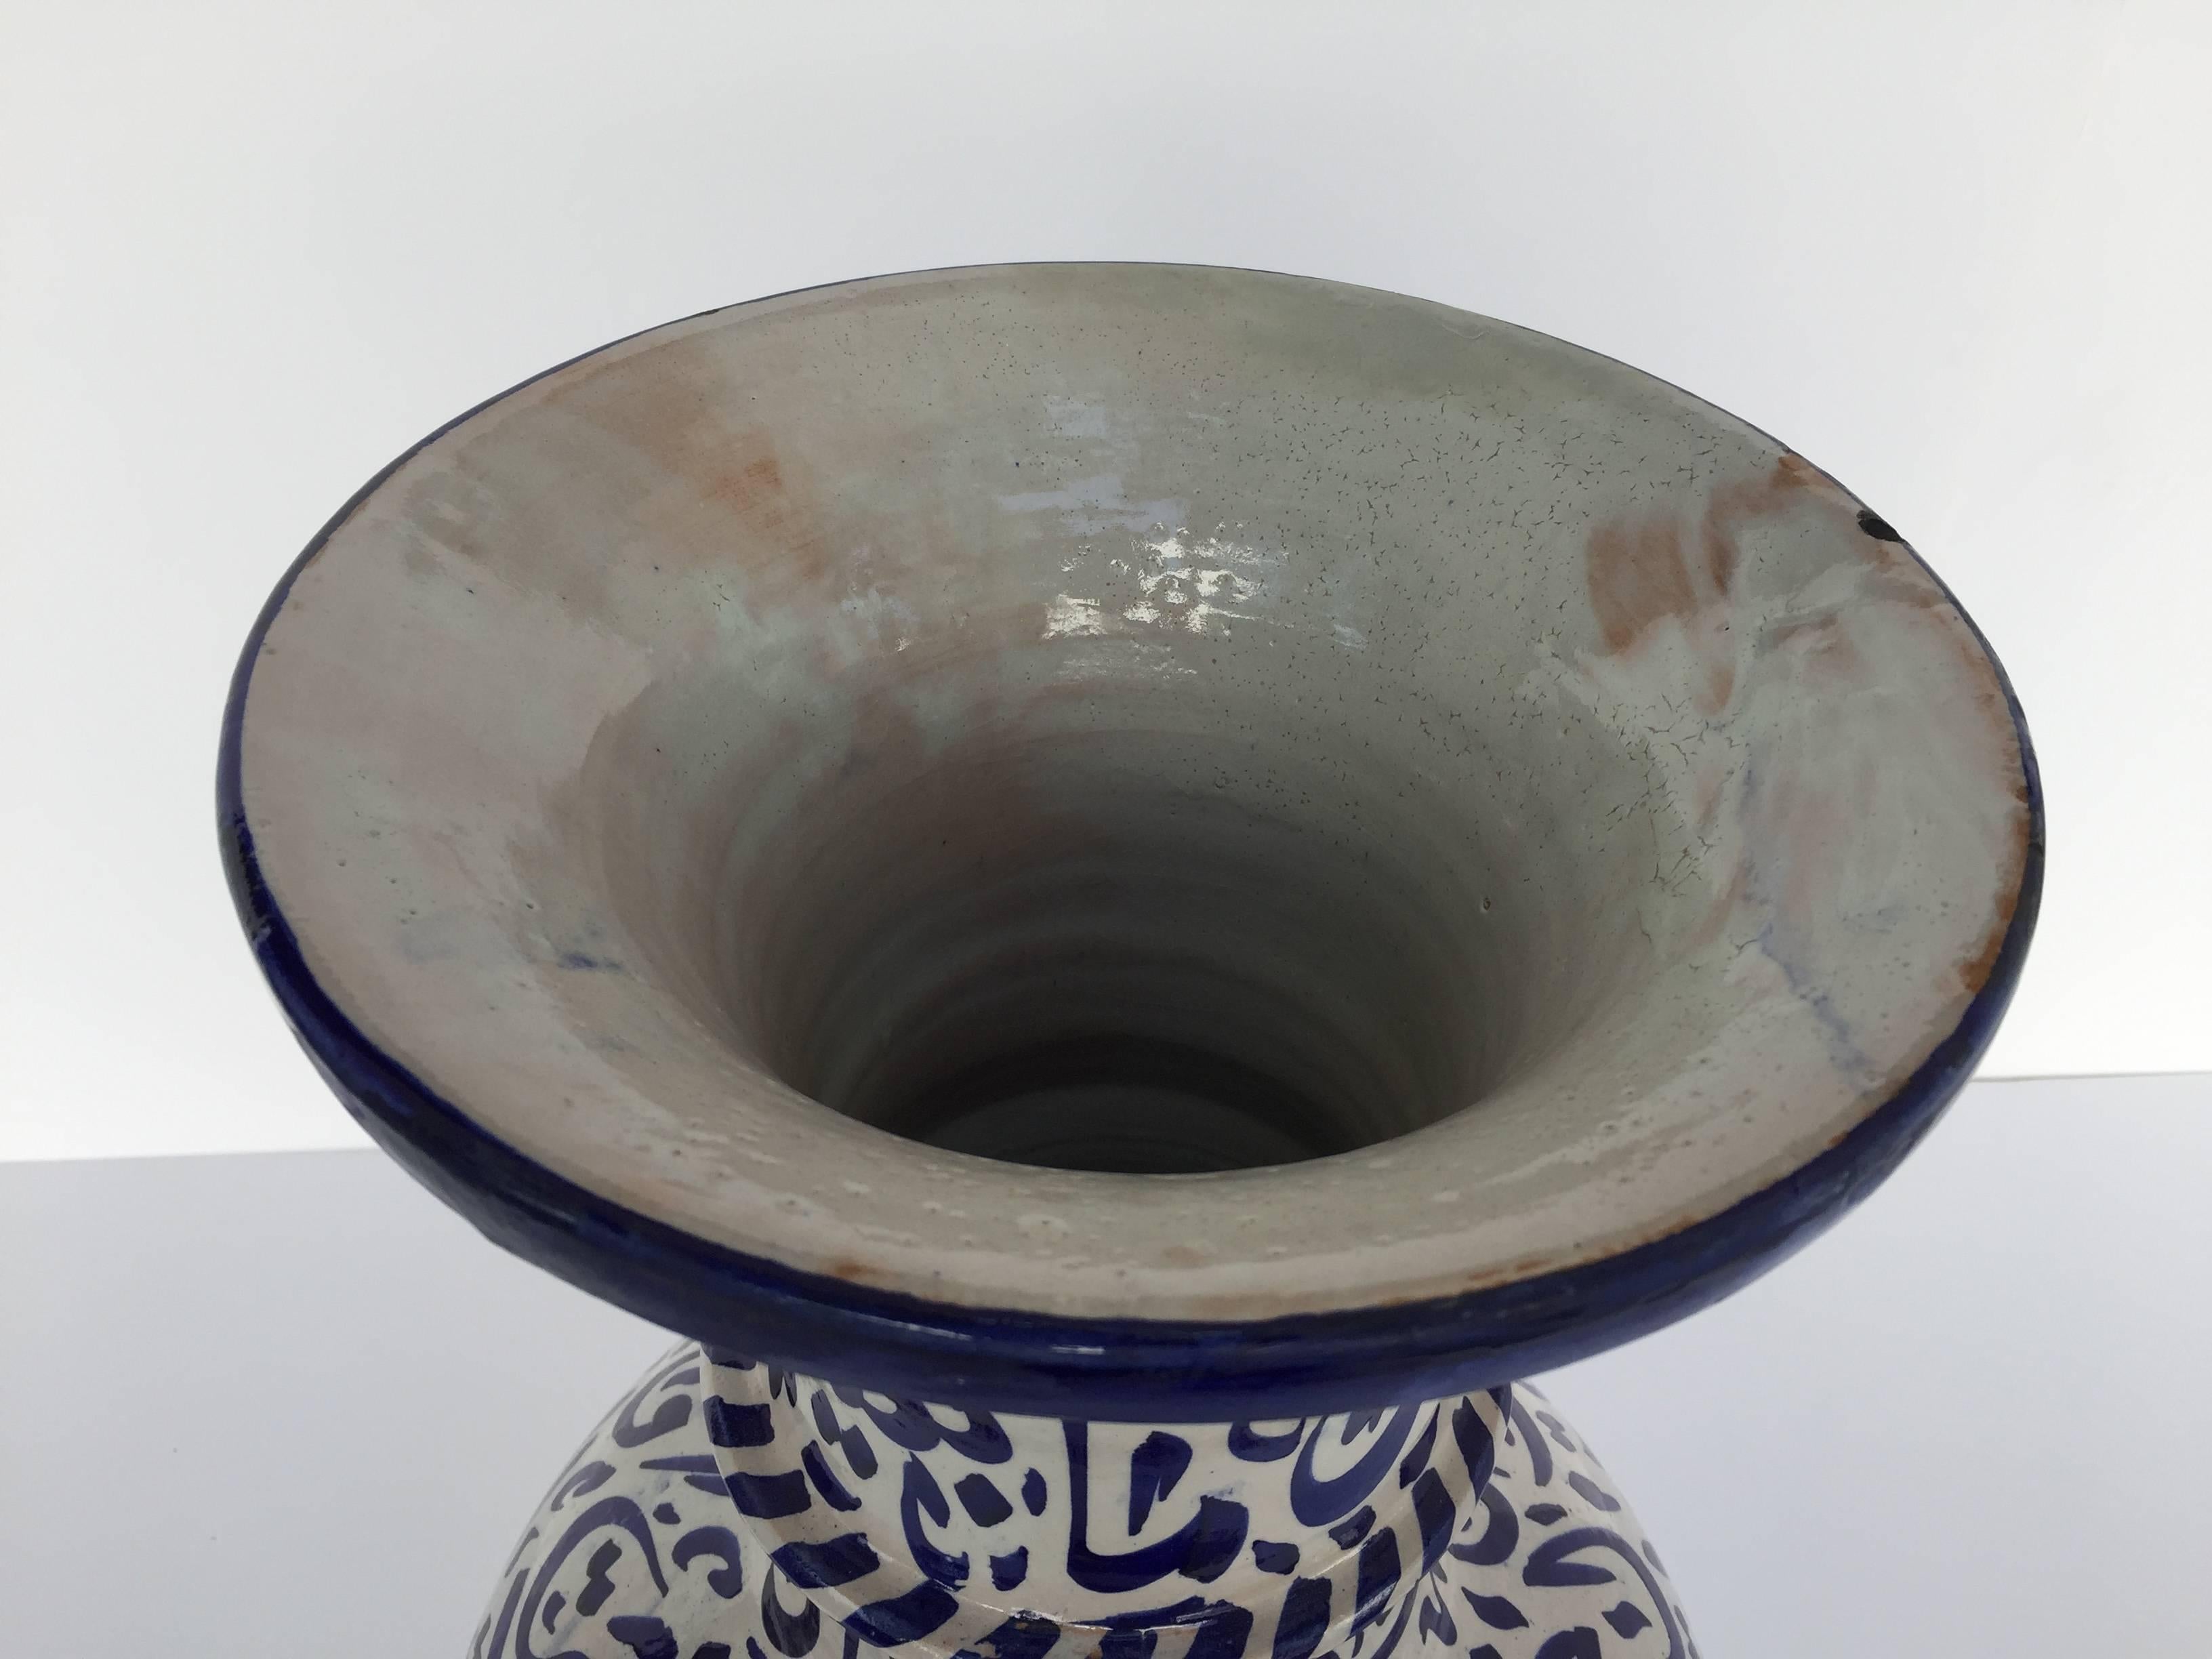 Large Moroccan Ceramic Vase from Fez with Blue Calligraphy Writing (Handgefertigt)